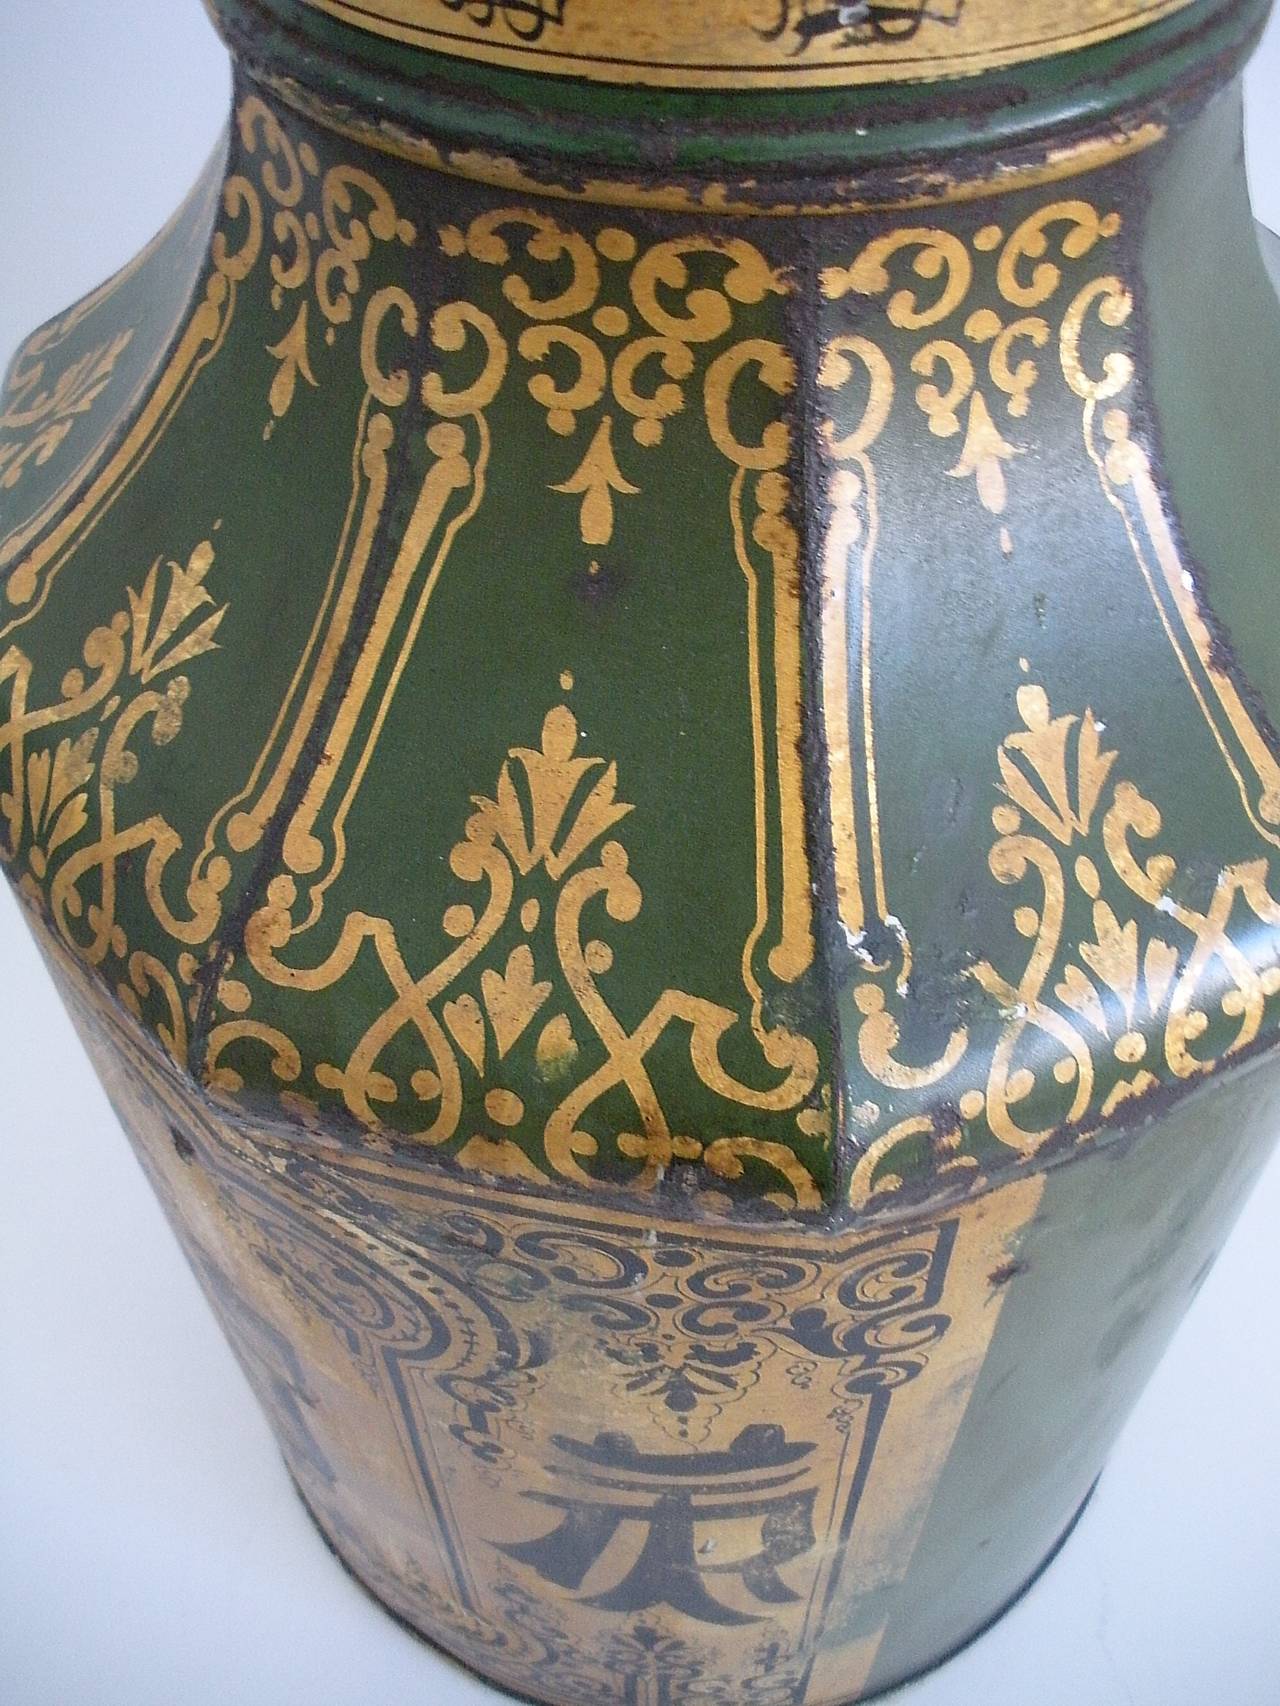 Painted 19th Century Tole Ware Chinese Tea Canister Lamp